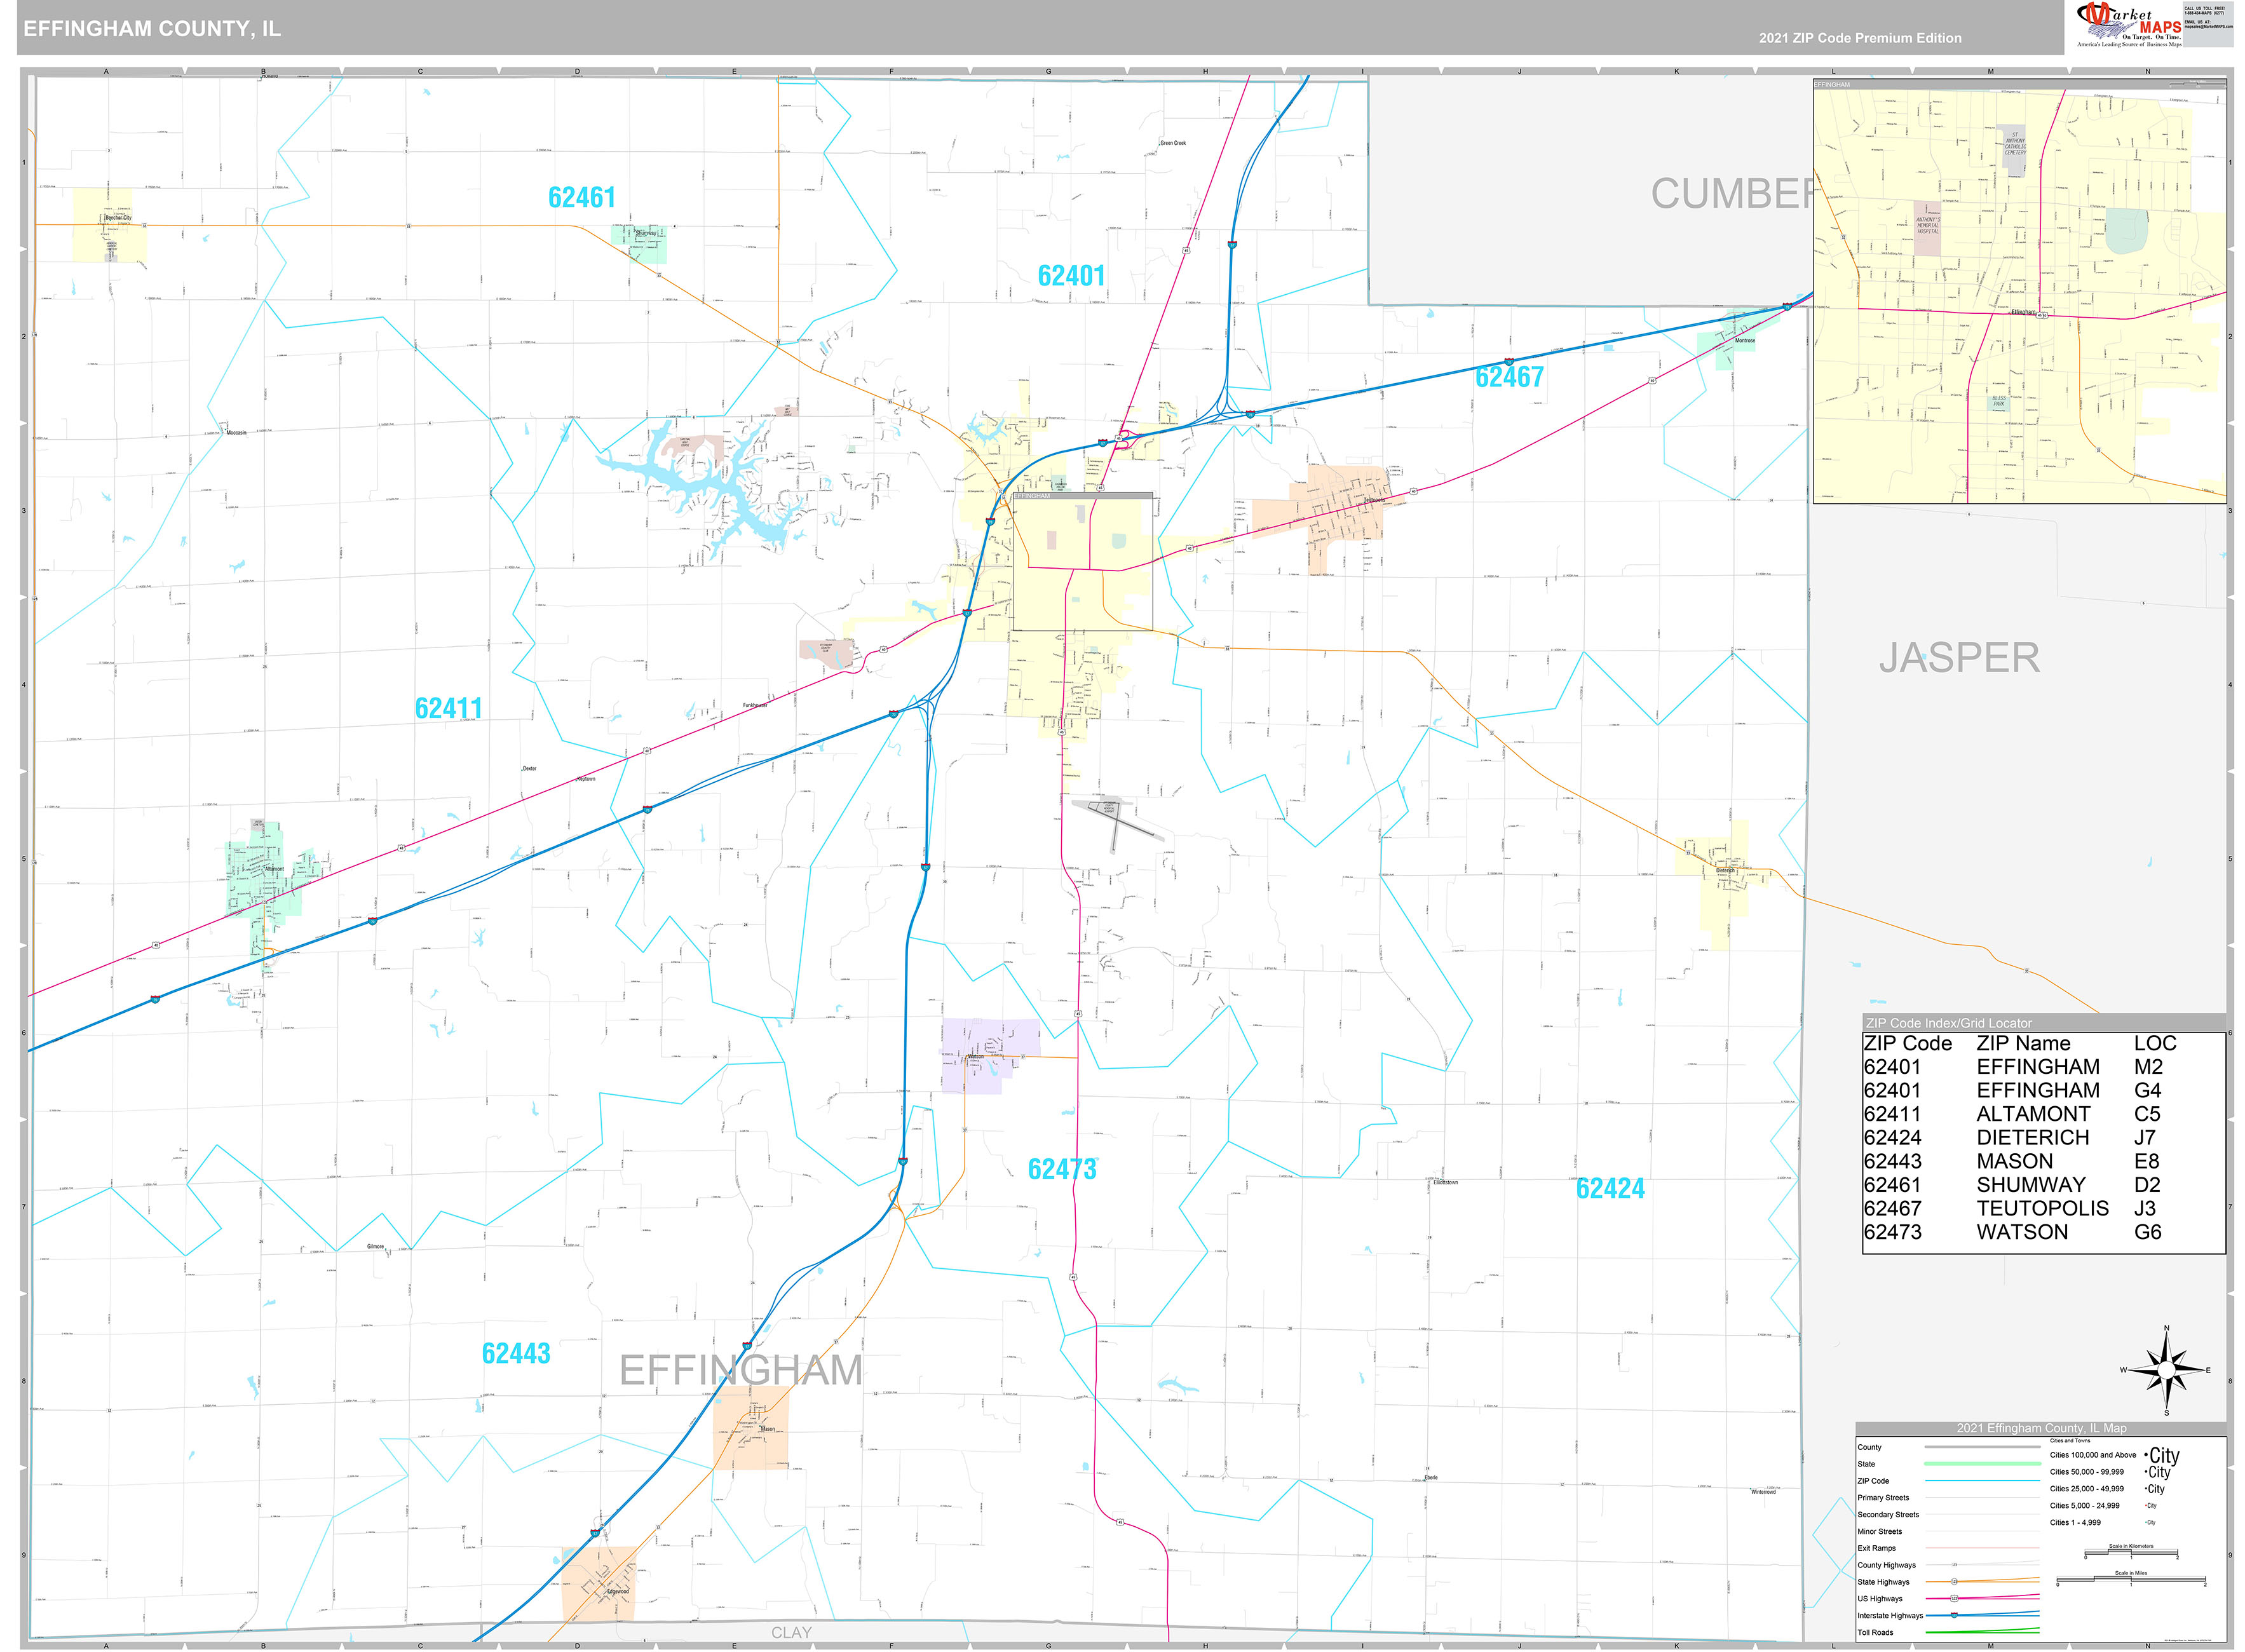 Effingham County IL Wall Map Premium Style by MarketMAPS